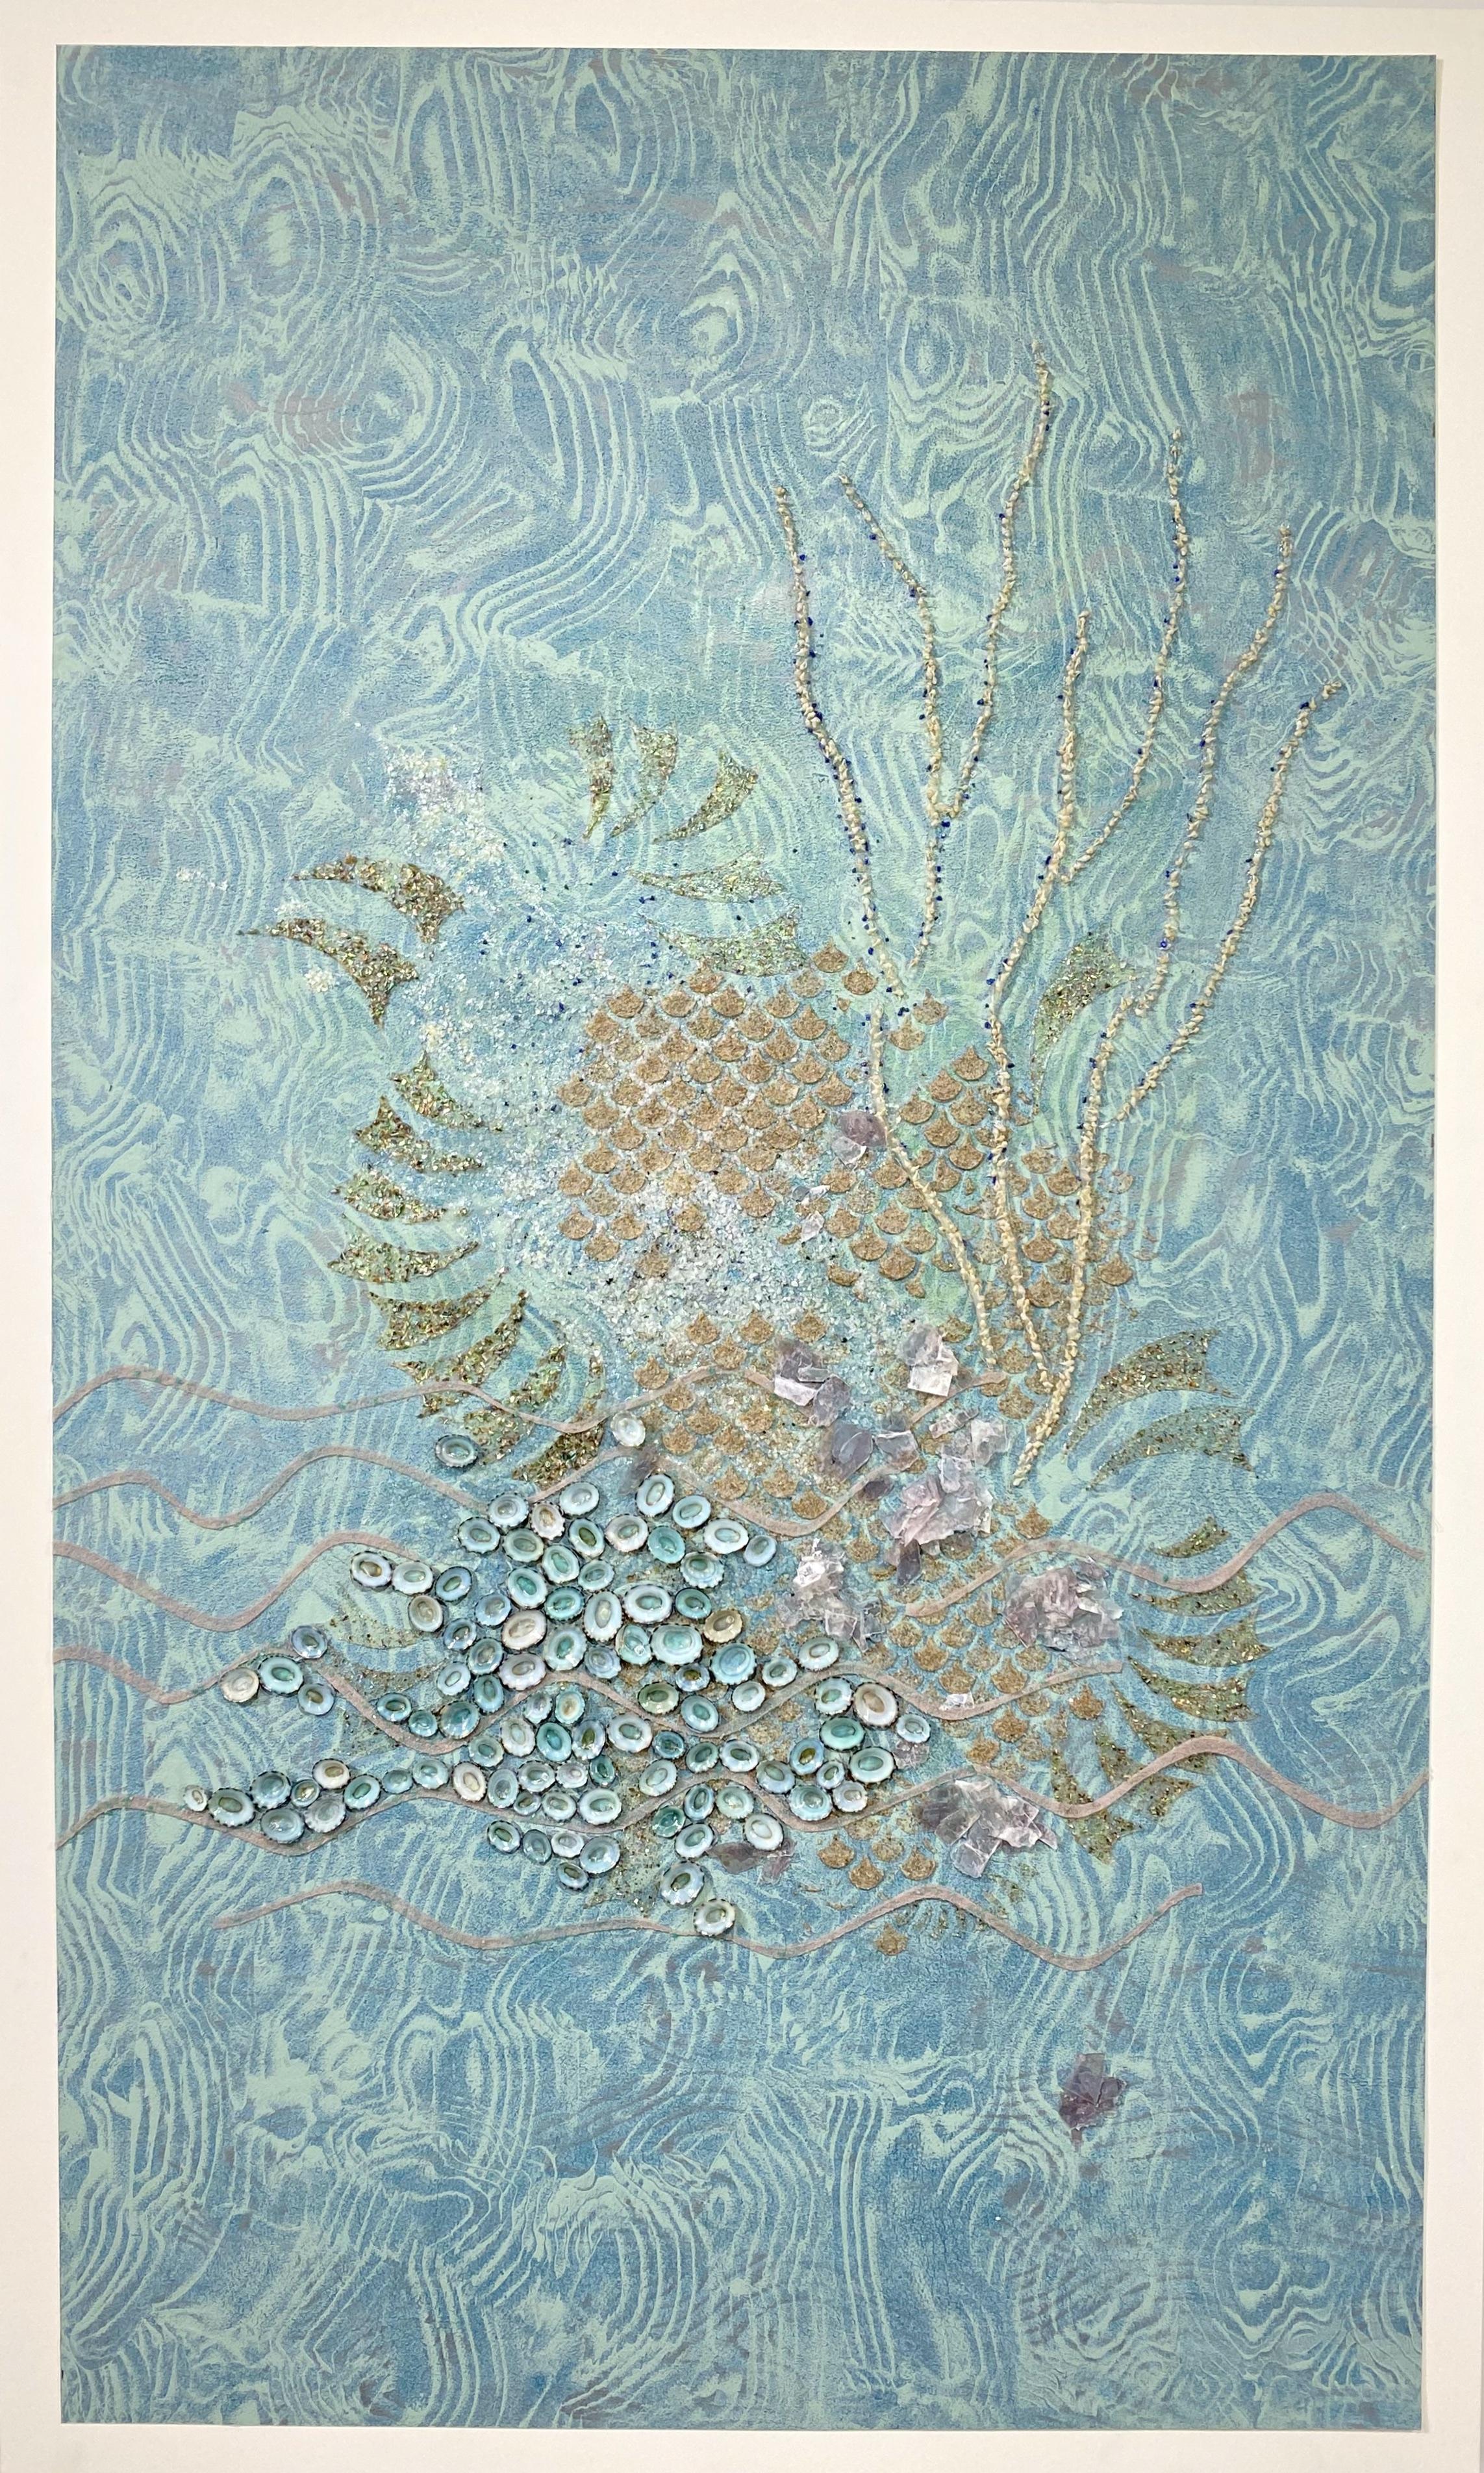 Shallows, Light Blue Abalone, Conch Shell Mixed Media Texture Abstract Pattern - Mixed Media Art by Eleanor White